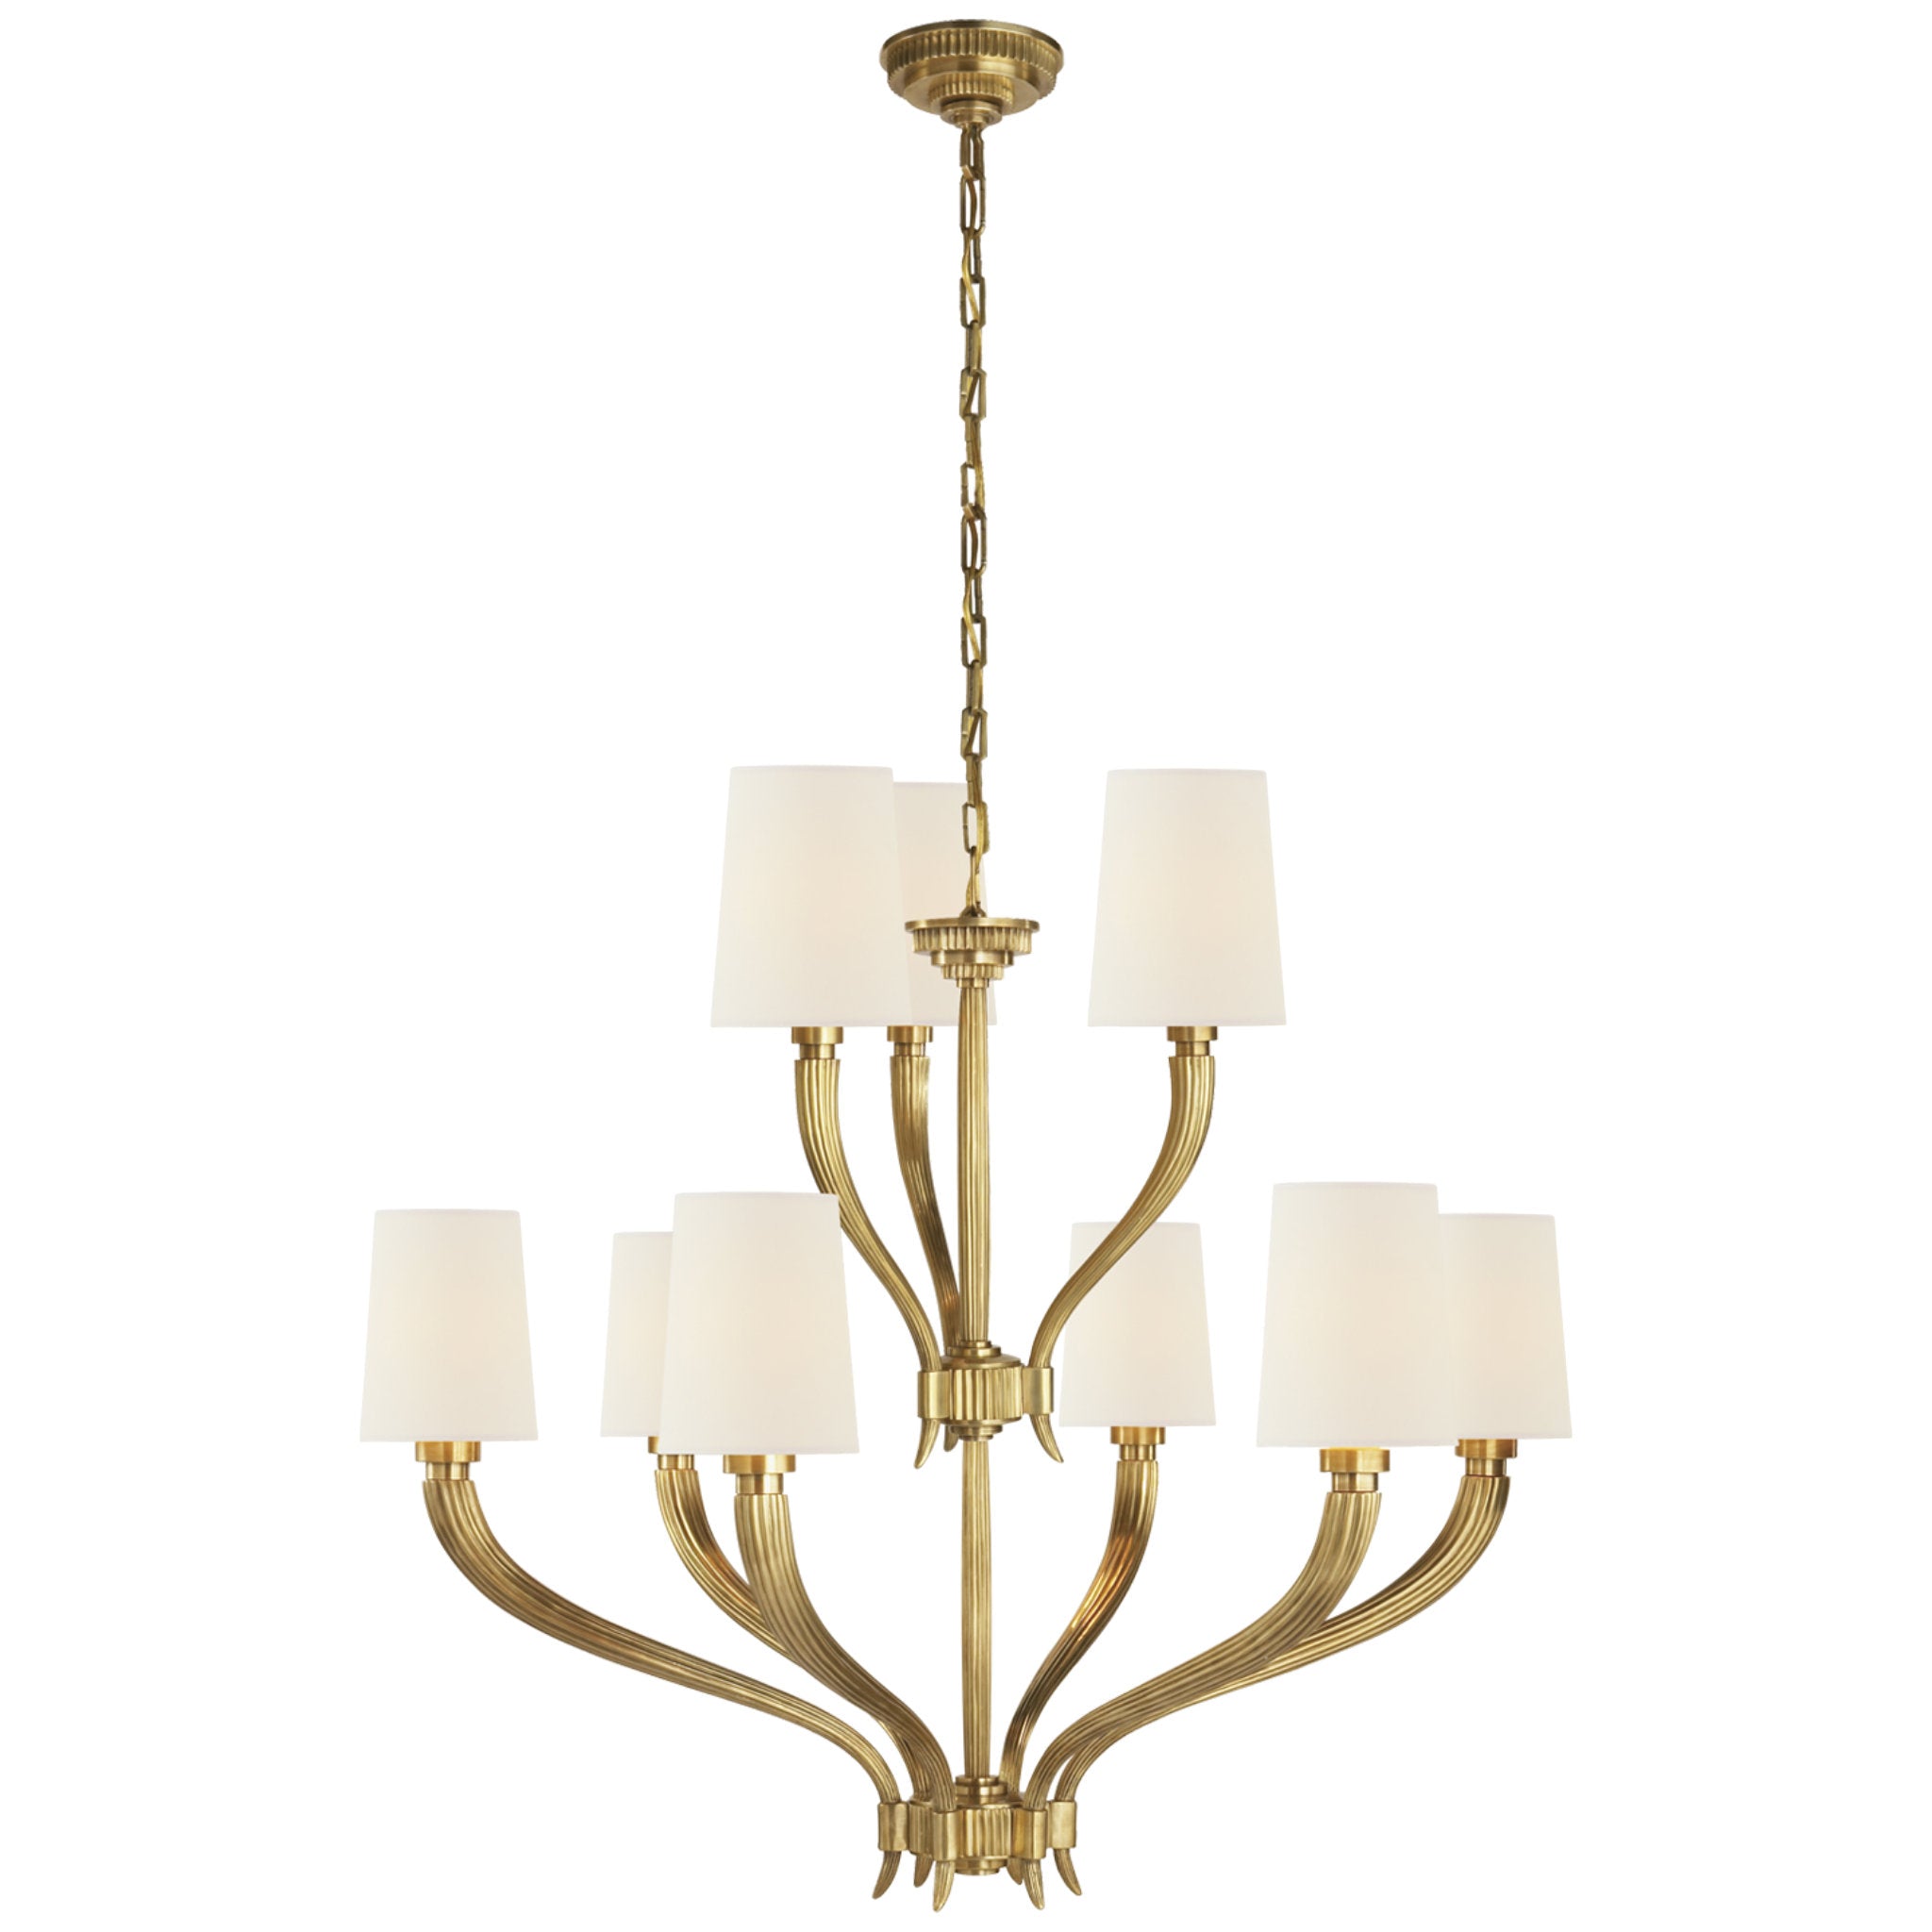 Chapman & Myers Ruhlmann 2-Tier Chandelier in Antique-Burnished Brass with Linen Shades